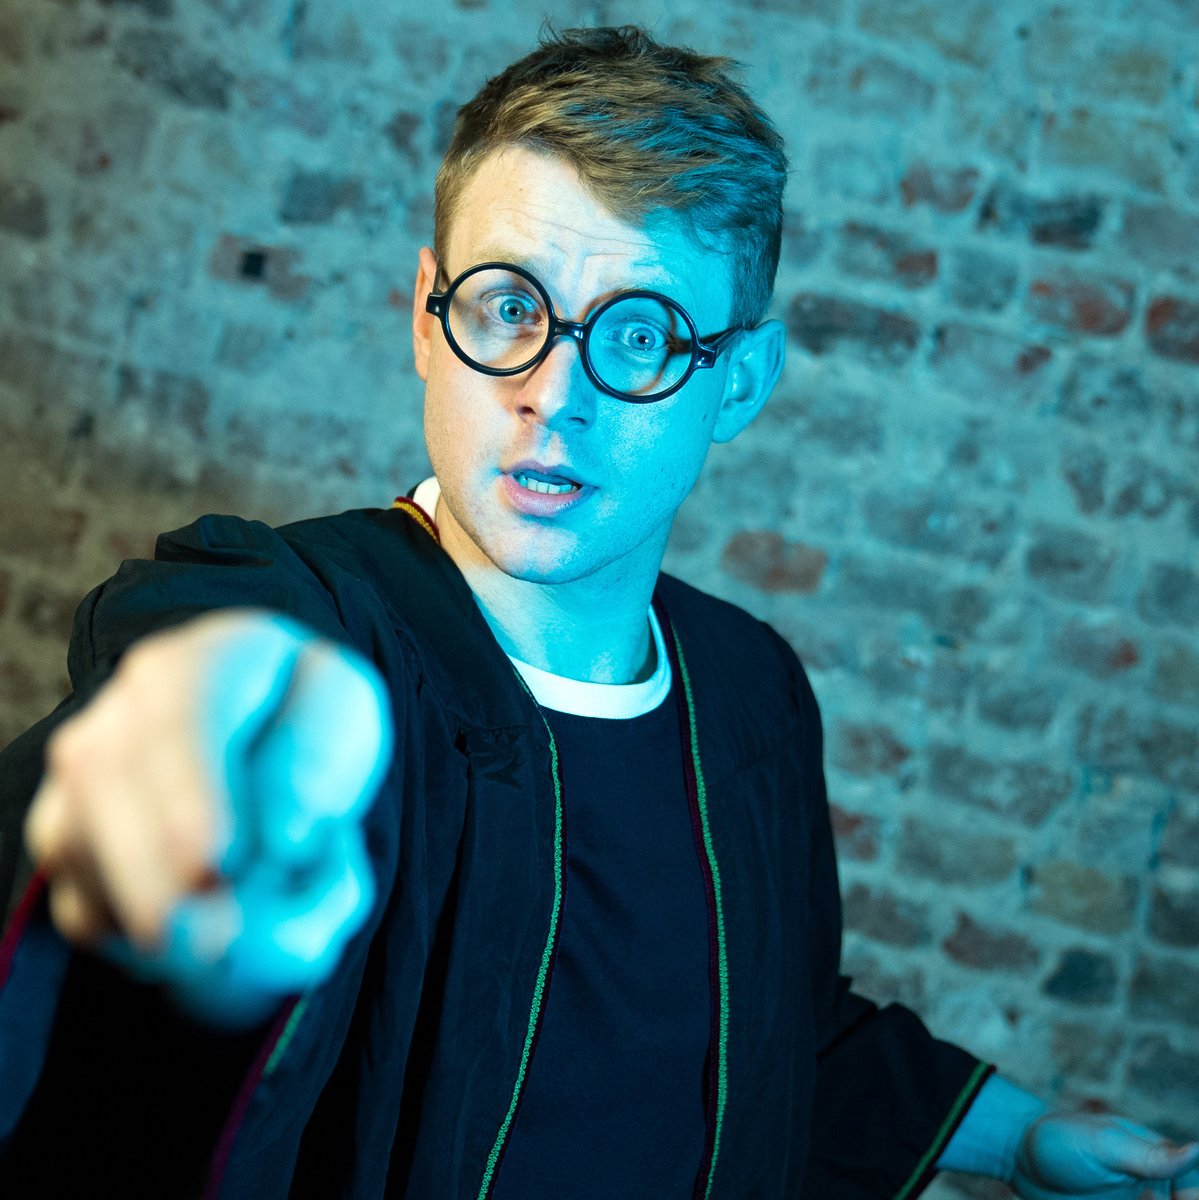 Meet the cast of Potted Potter - The Unauthorised Harry Experience - A Parody by Dan & Jeff ahead of its 5th Australian tour in April & May It will be performed by Scott Hoatson & Brendan Murphy plus alternate performer Jacob Jackson Dates & tickets at pottedpotter.com.au